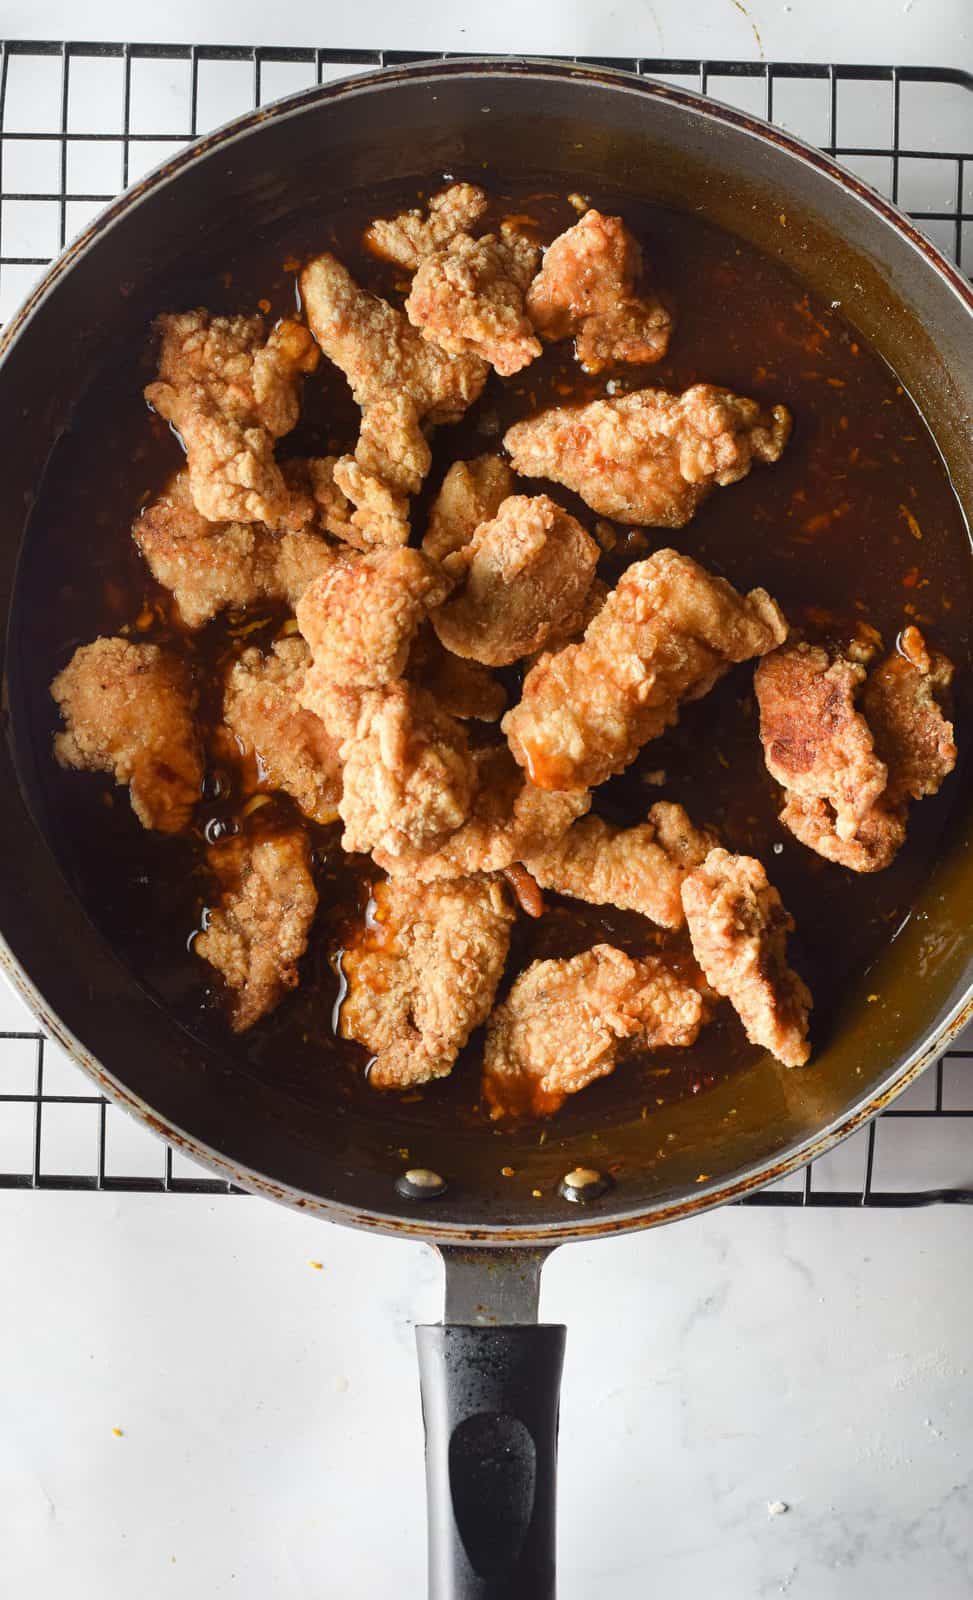 cooked chicken pieces added to orange sauce in a large skillet.